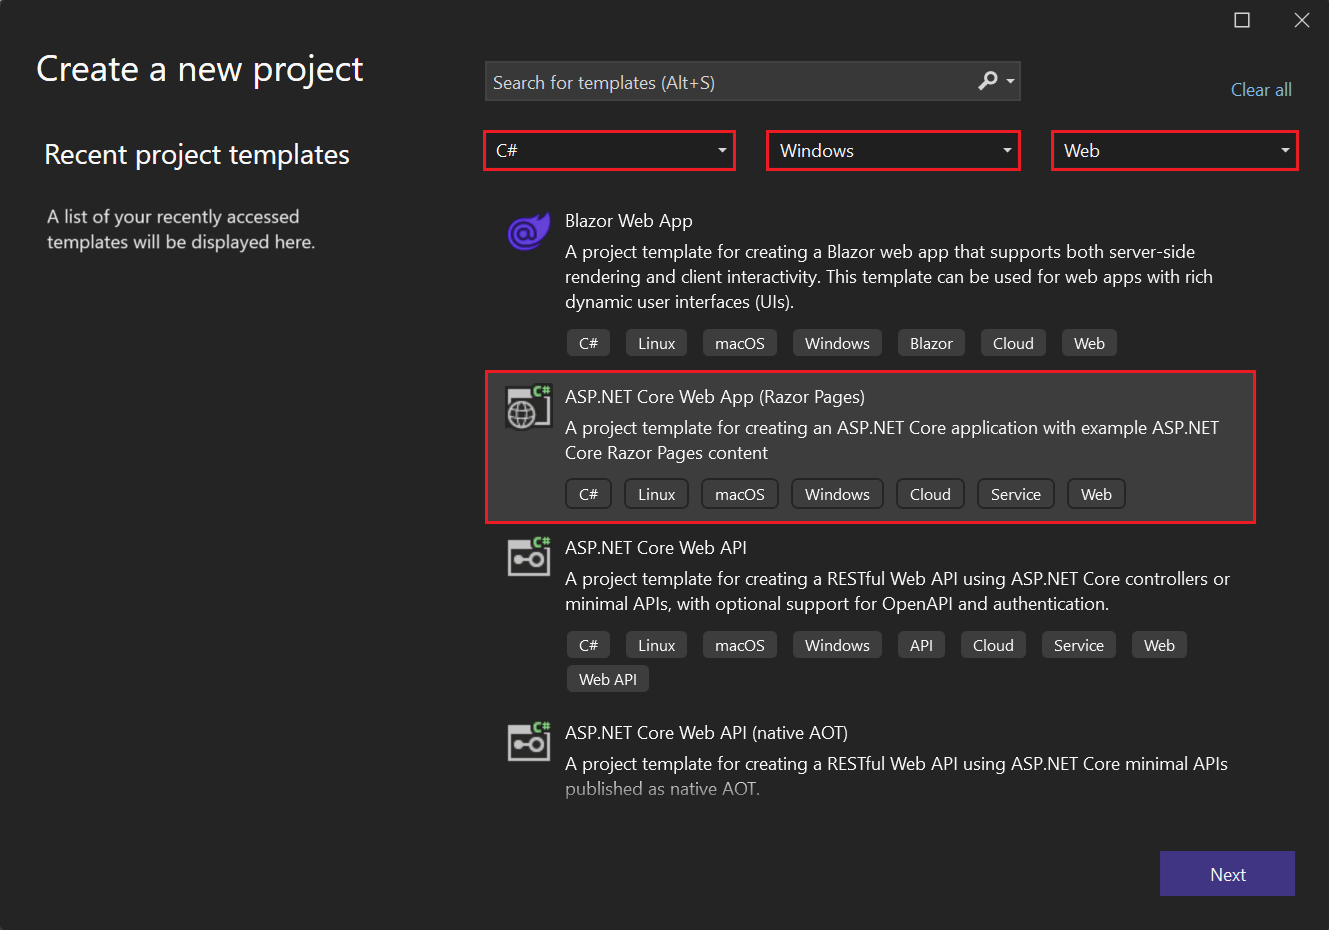 Screenshot shows the ASP.NET Core Web App project template selected and highlighted on the Create a new project page.